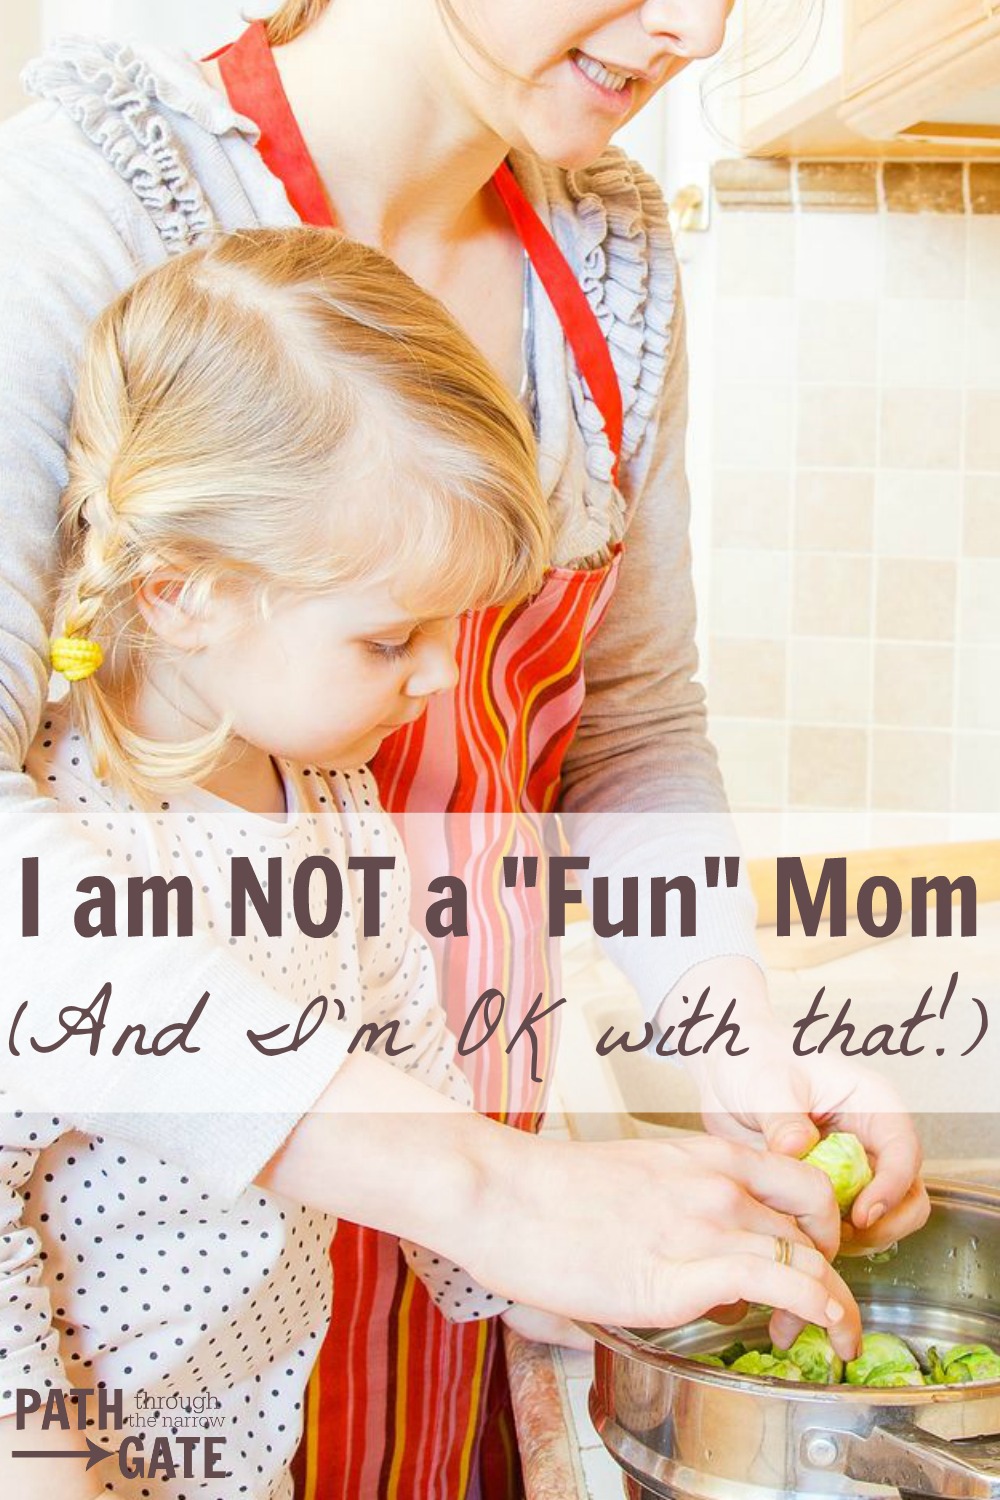 Do you feel like a failure because you don't measure up to your own expectations for being a "fun" mom? Let's stop measuring our value as parents with the yard stick of "fun" experiences. You don't have to be a fun mom to be a good mom!